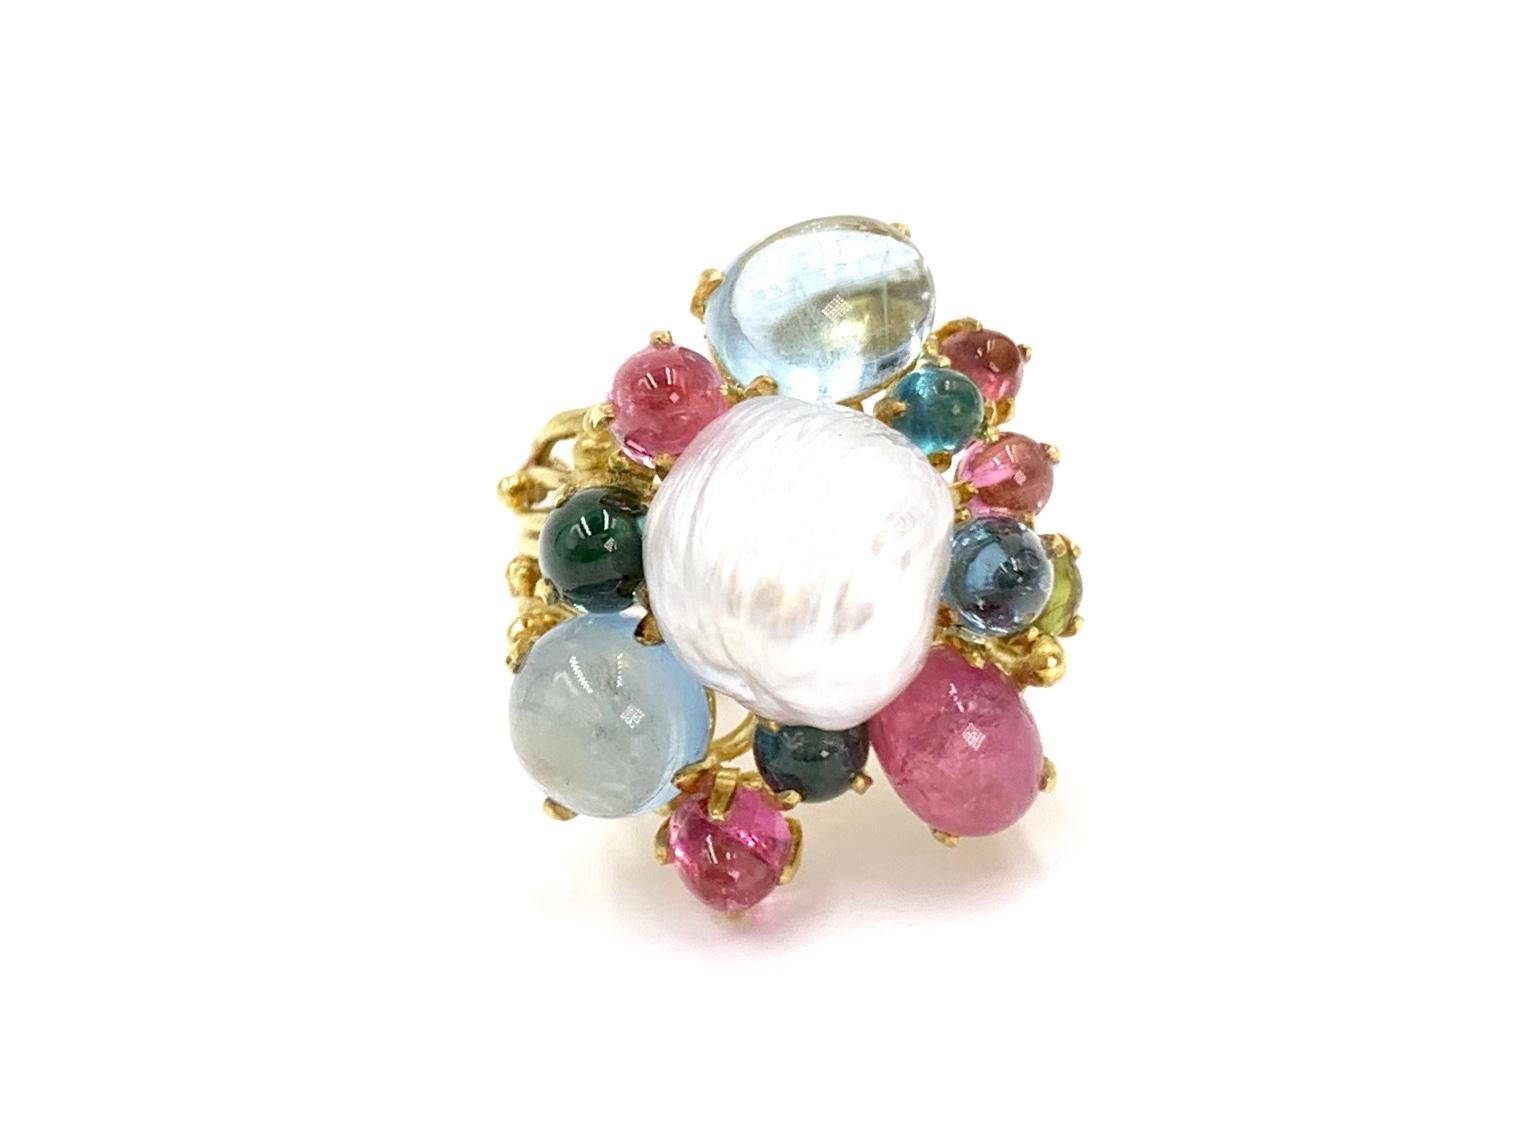 An artistic and whimsical 18 karat yellow gold wide ring featuring beautiful multi-color cabochon cut tourmaline gemstones and a textured lustrous 11mm white pearl. A total of 12 tourmaline gemstones in varying sizes range in color from vibrant pink